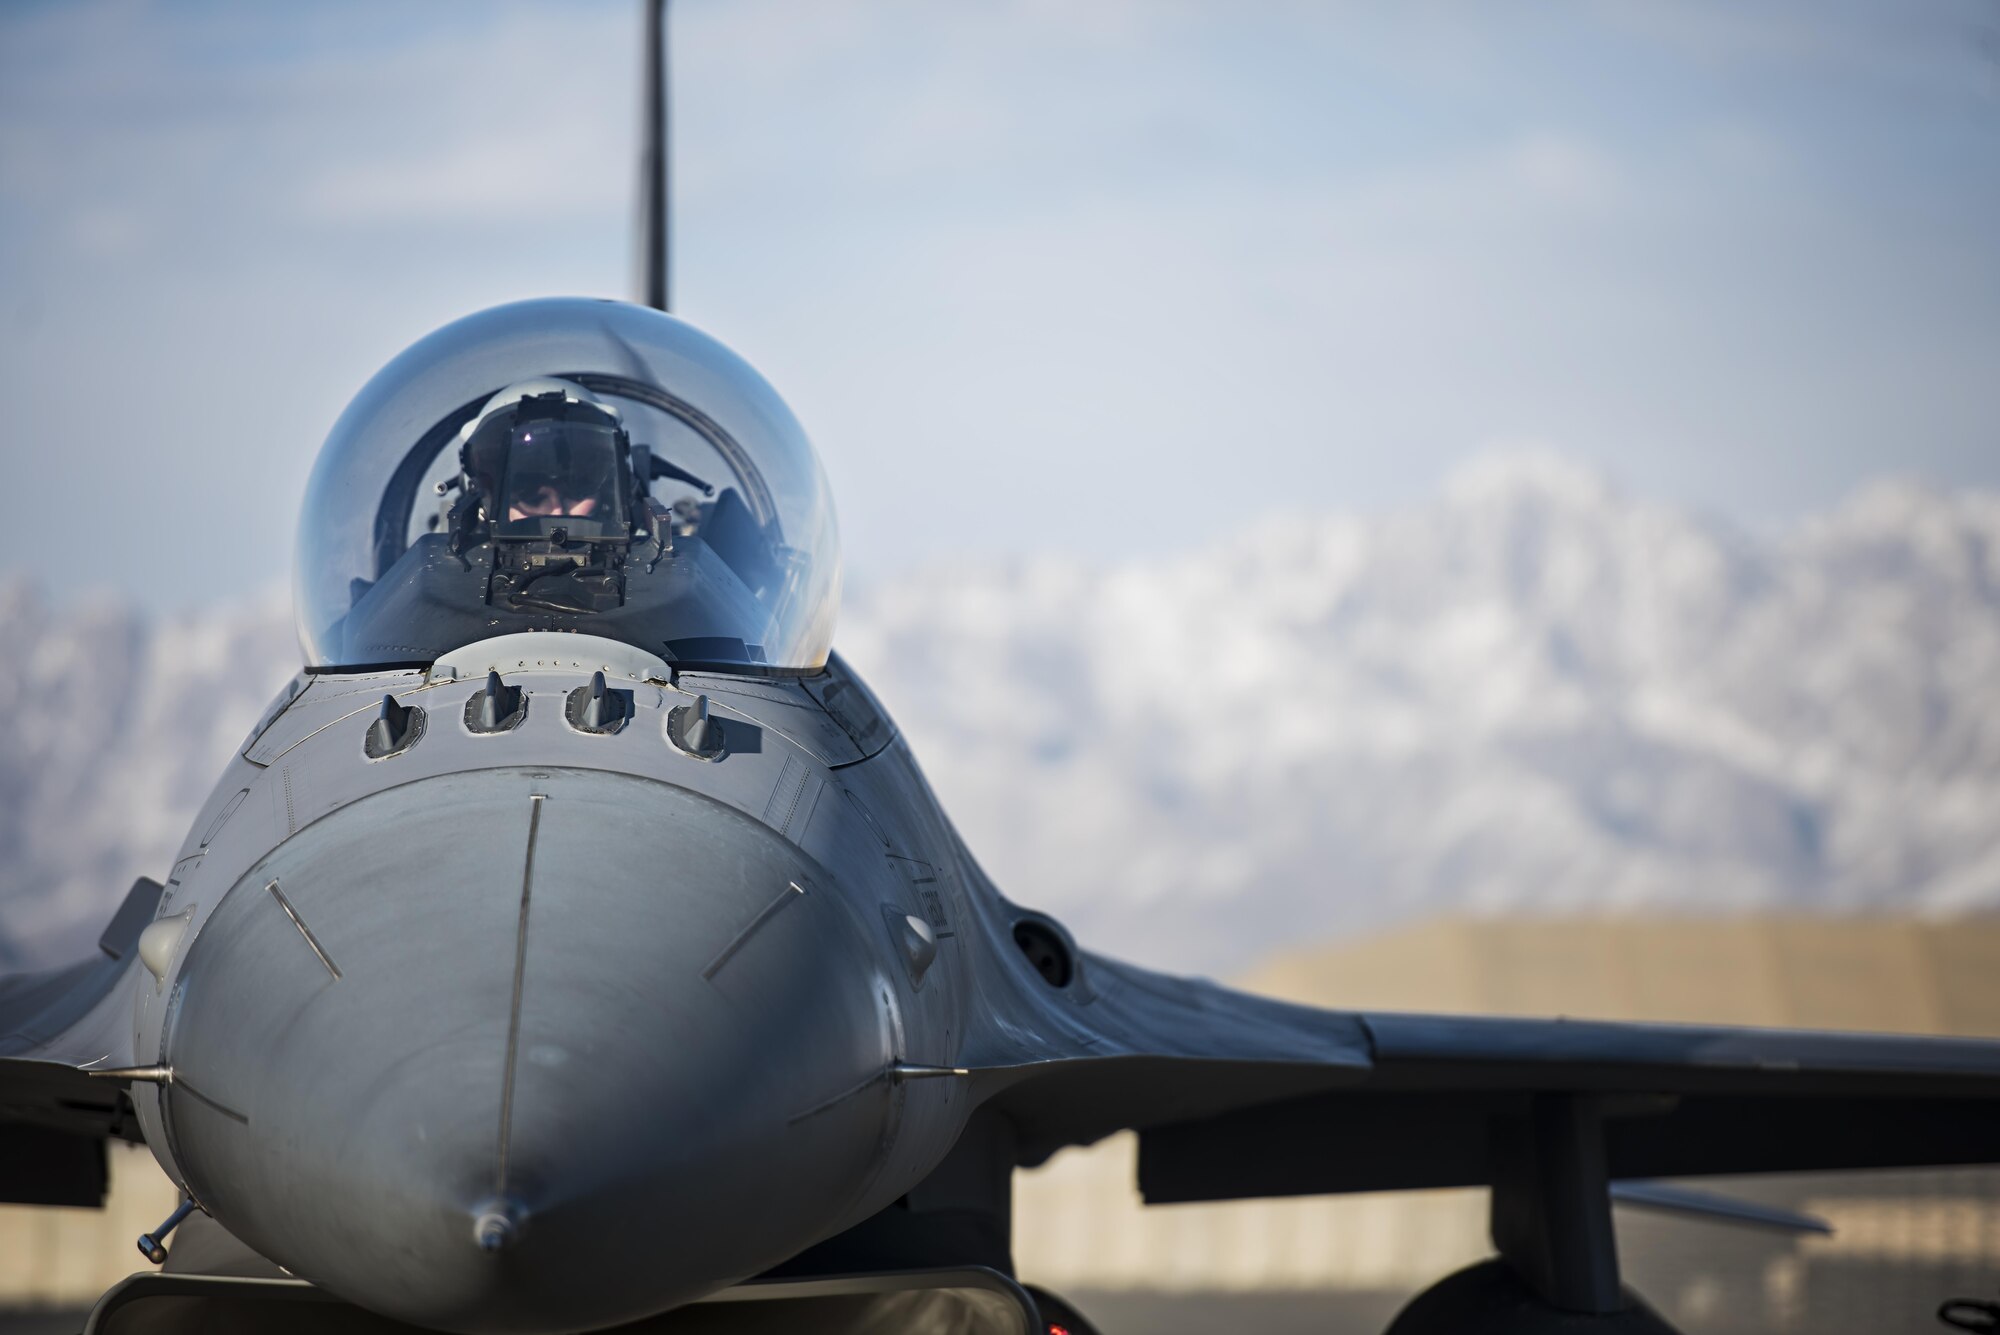 An F-16 Fighting Falcon belonging to the 79th Expeditionary Fighter Squadron out of Shaw Air Force Base, South Carolina, prepares to launch on a mission at Bagram Airfield, Afghanistan, Jan. 6, 2017. The F-16 is a compact, multi-role fighter aircraft. It is highly maneuverable and has proven itself in air-to-air combat and air-to-surface attack. (U.S. Air Force photo by Staff Sgt. Katherine Spessa)